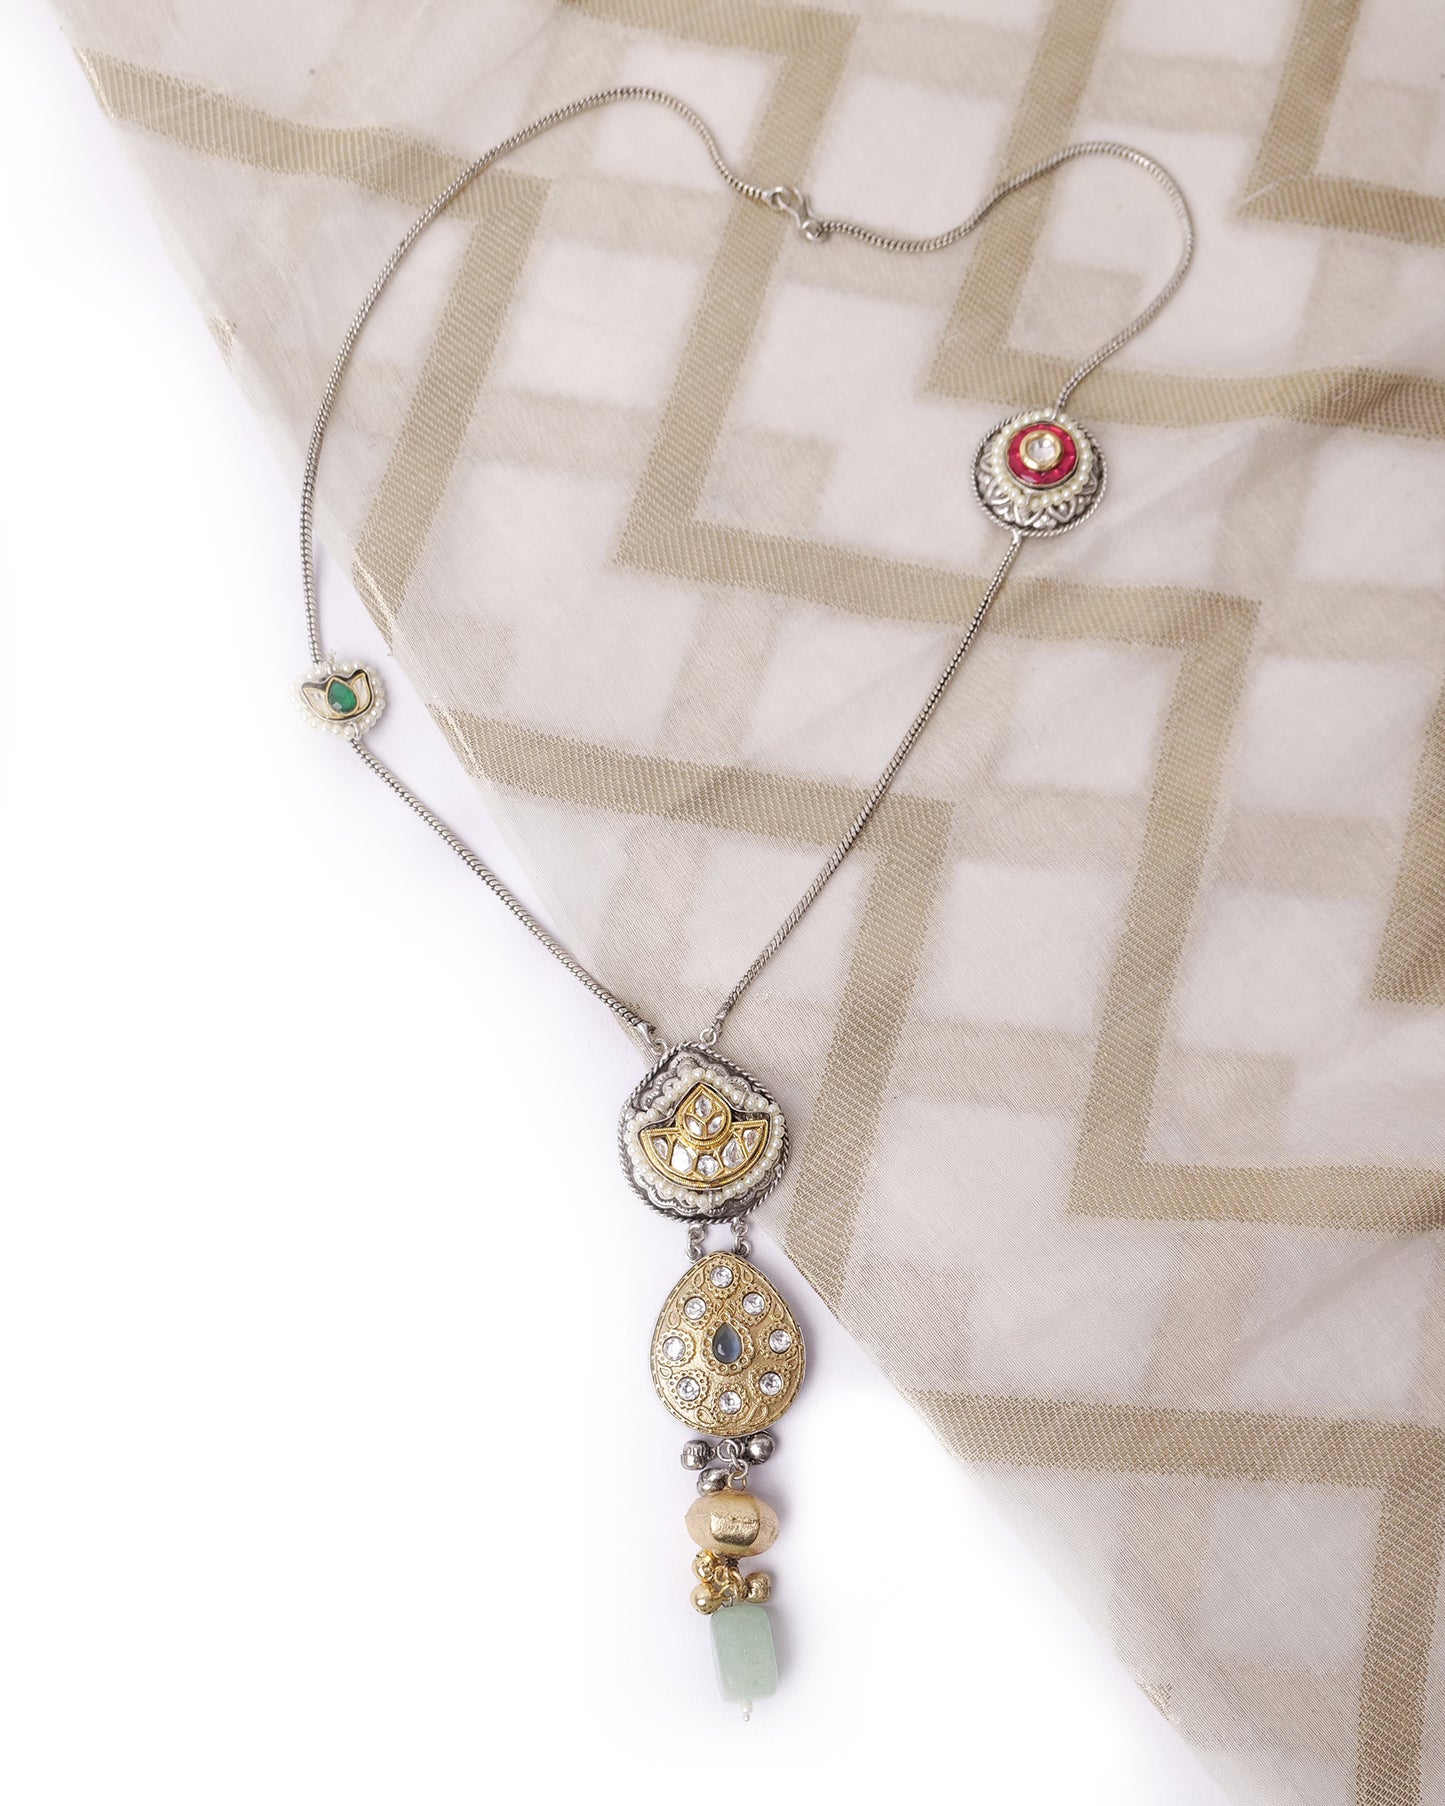 Dual tone pendant with silver chain and motifs